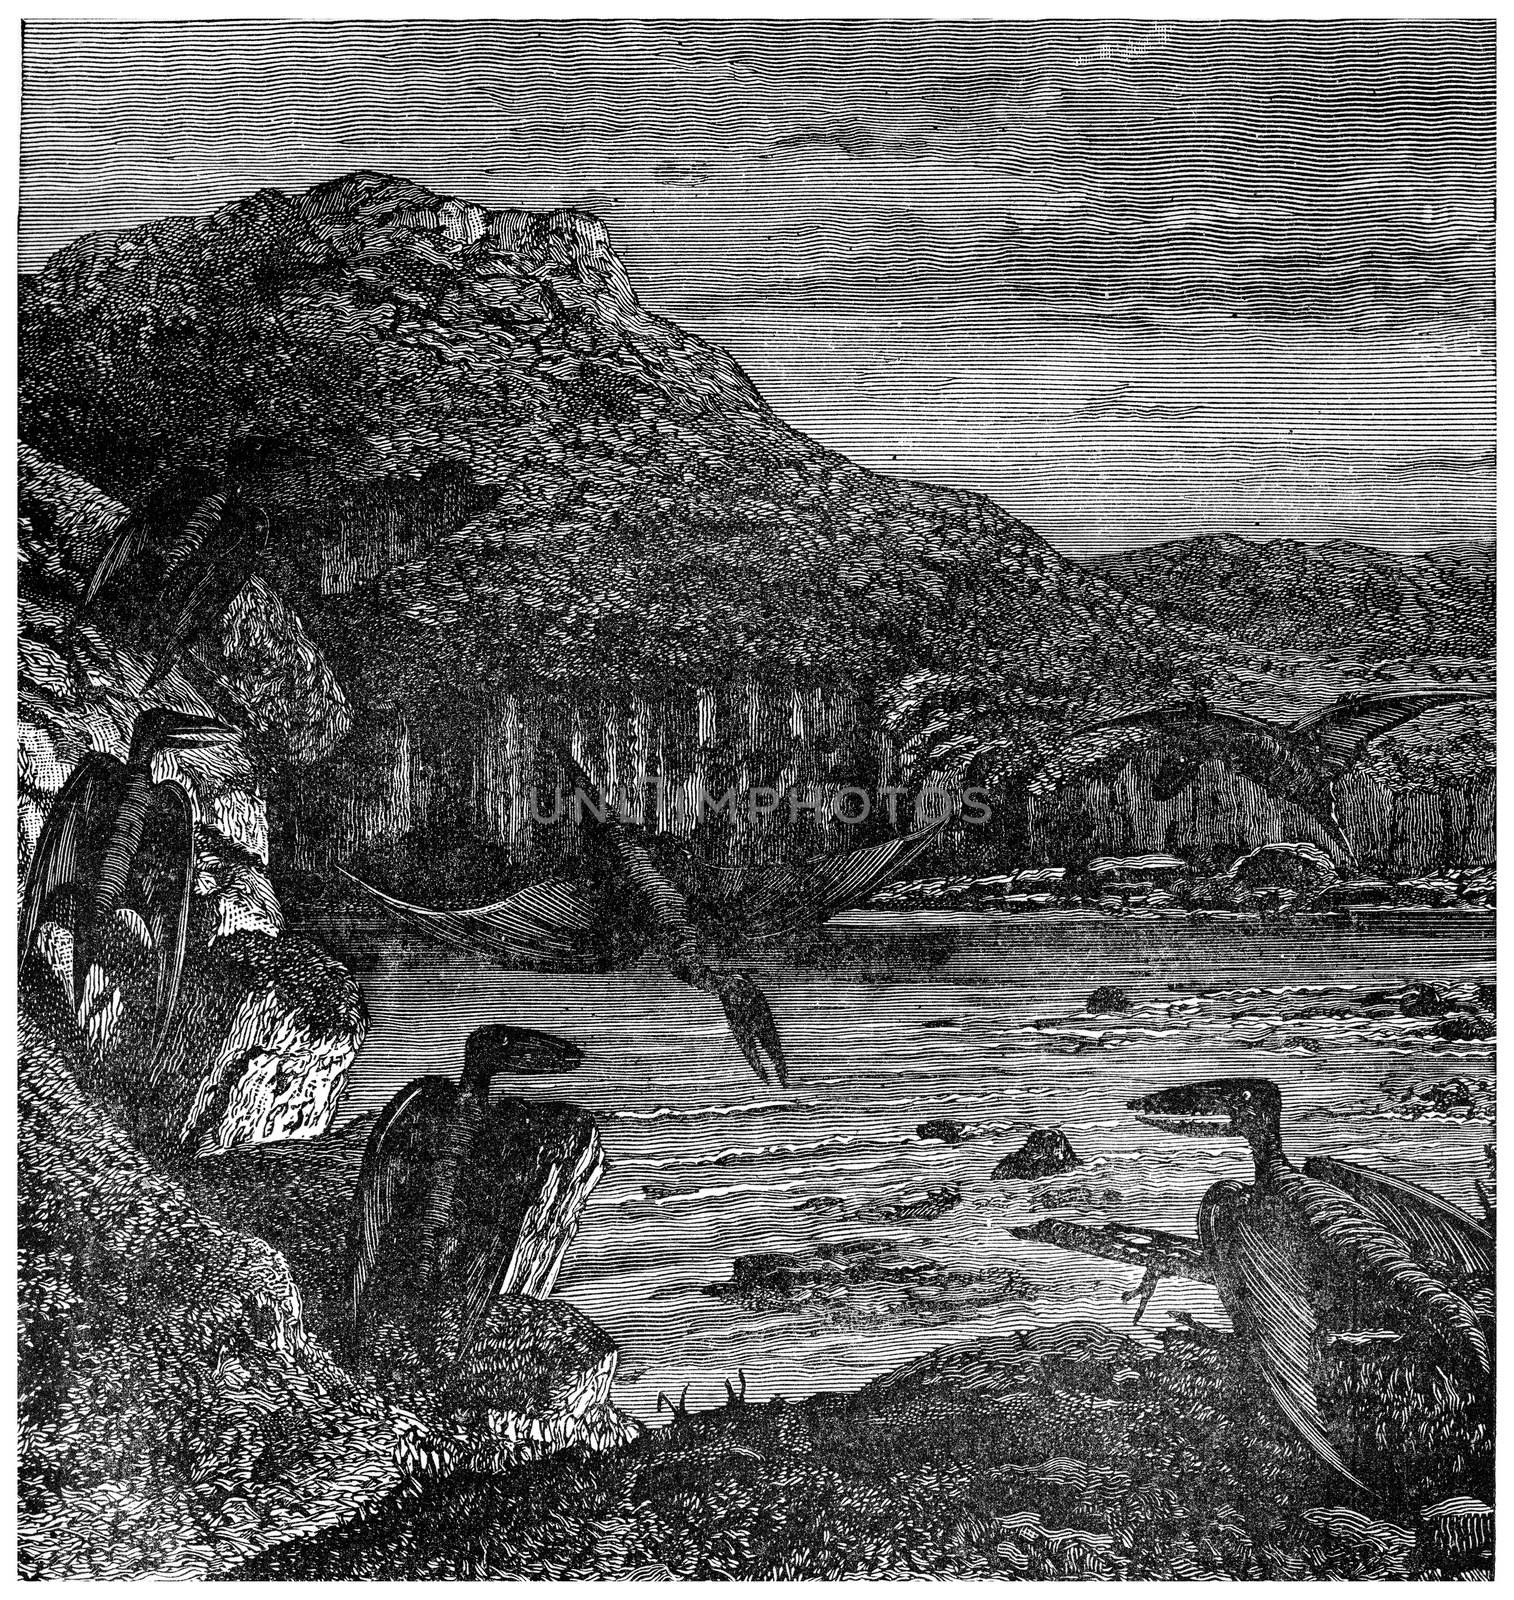 Pterodactyls, vintage engraved illustration. Earth before man – 1886.